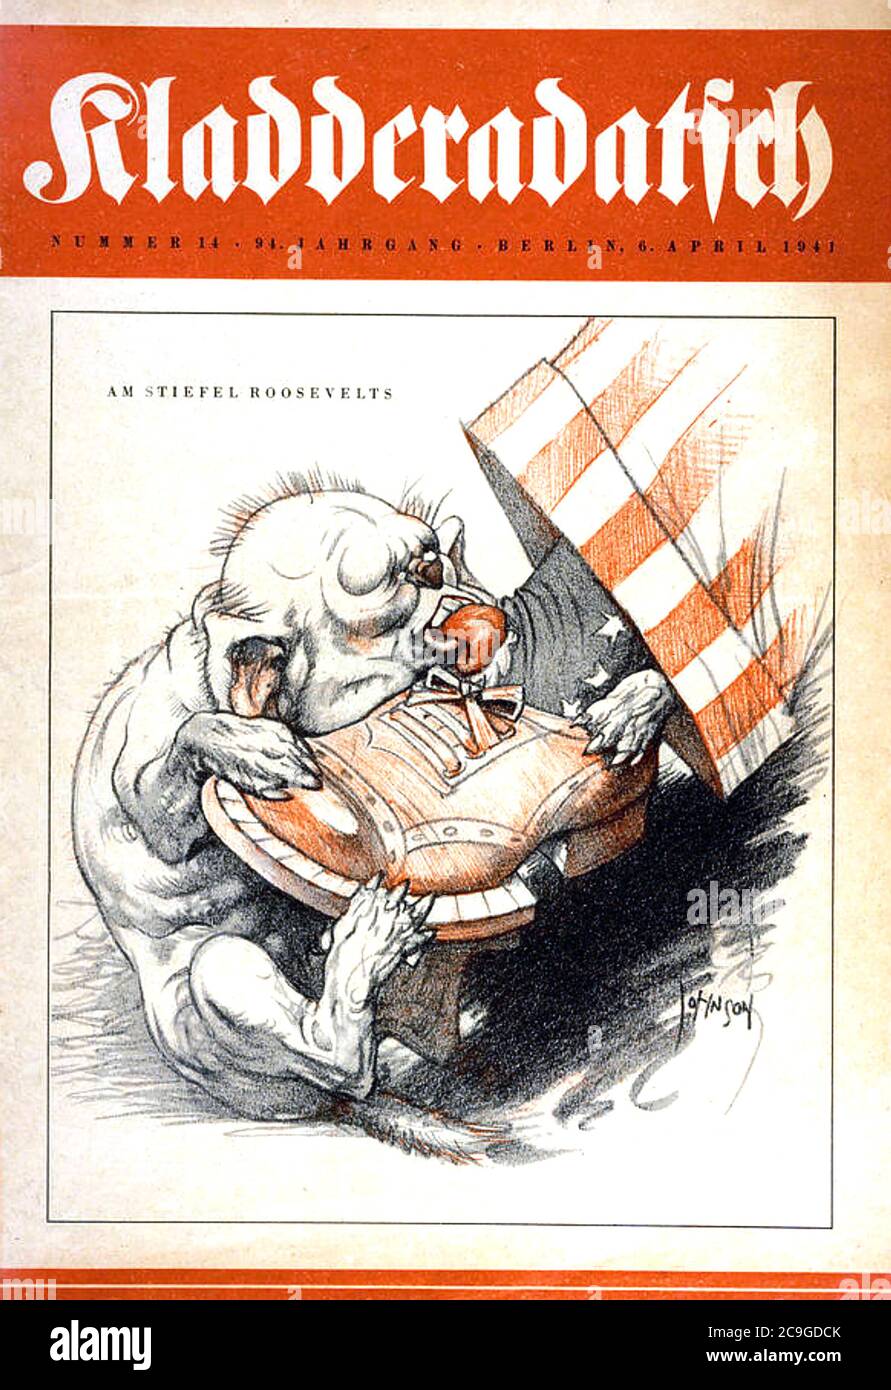 KLADDERADATSCH April 1941. German satirical magazine lampooning Churchill's attempts to involve the USA in the war. Stock Photo